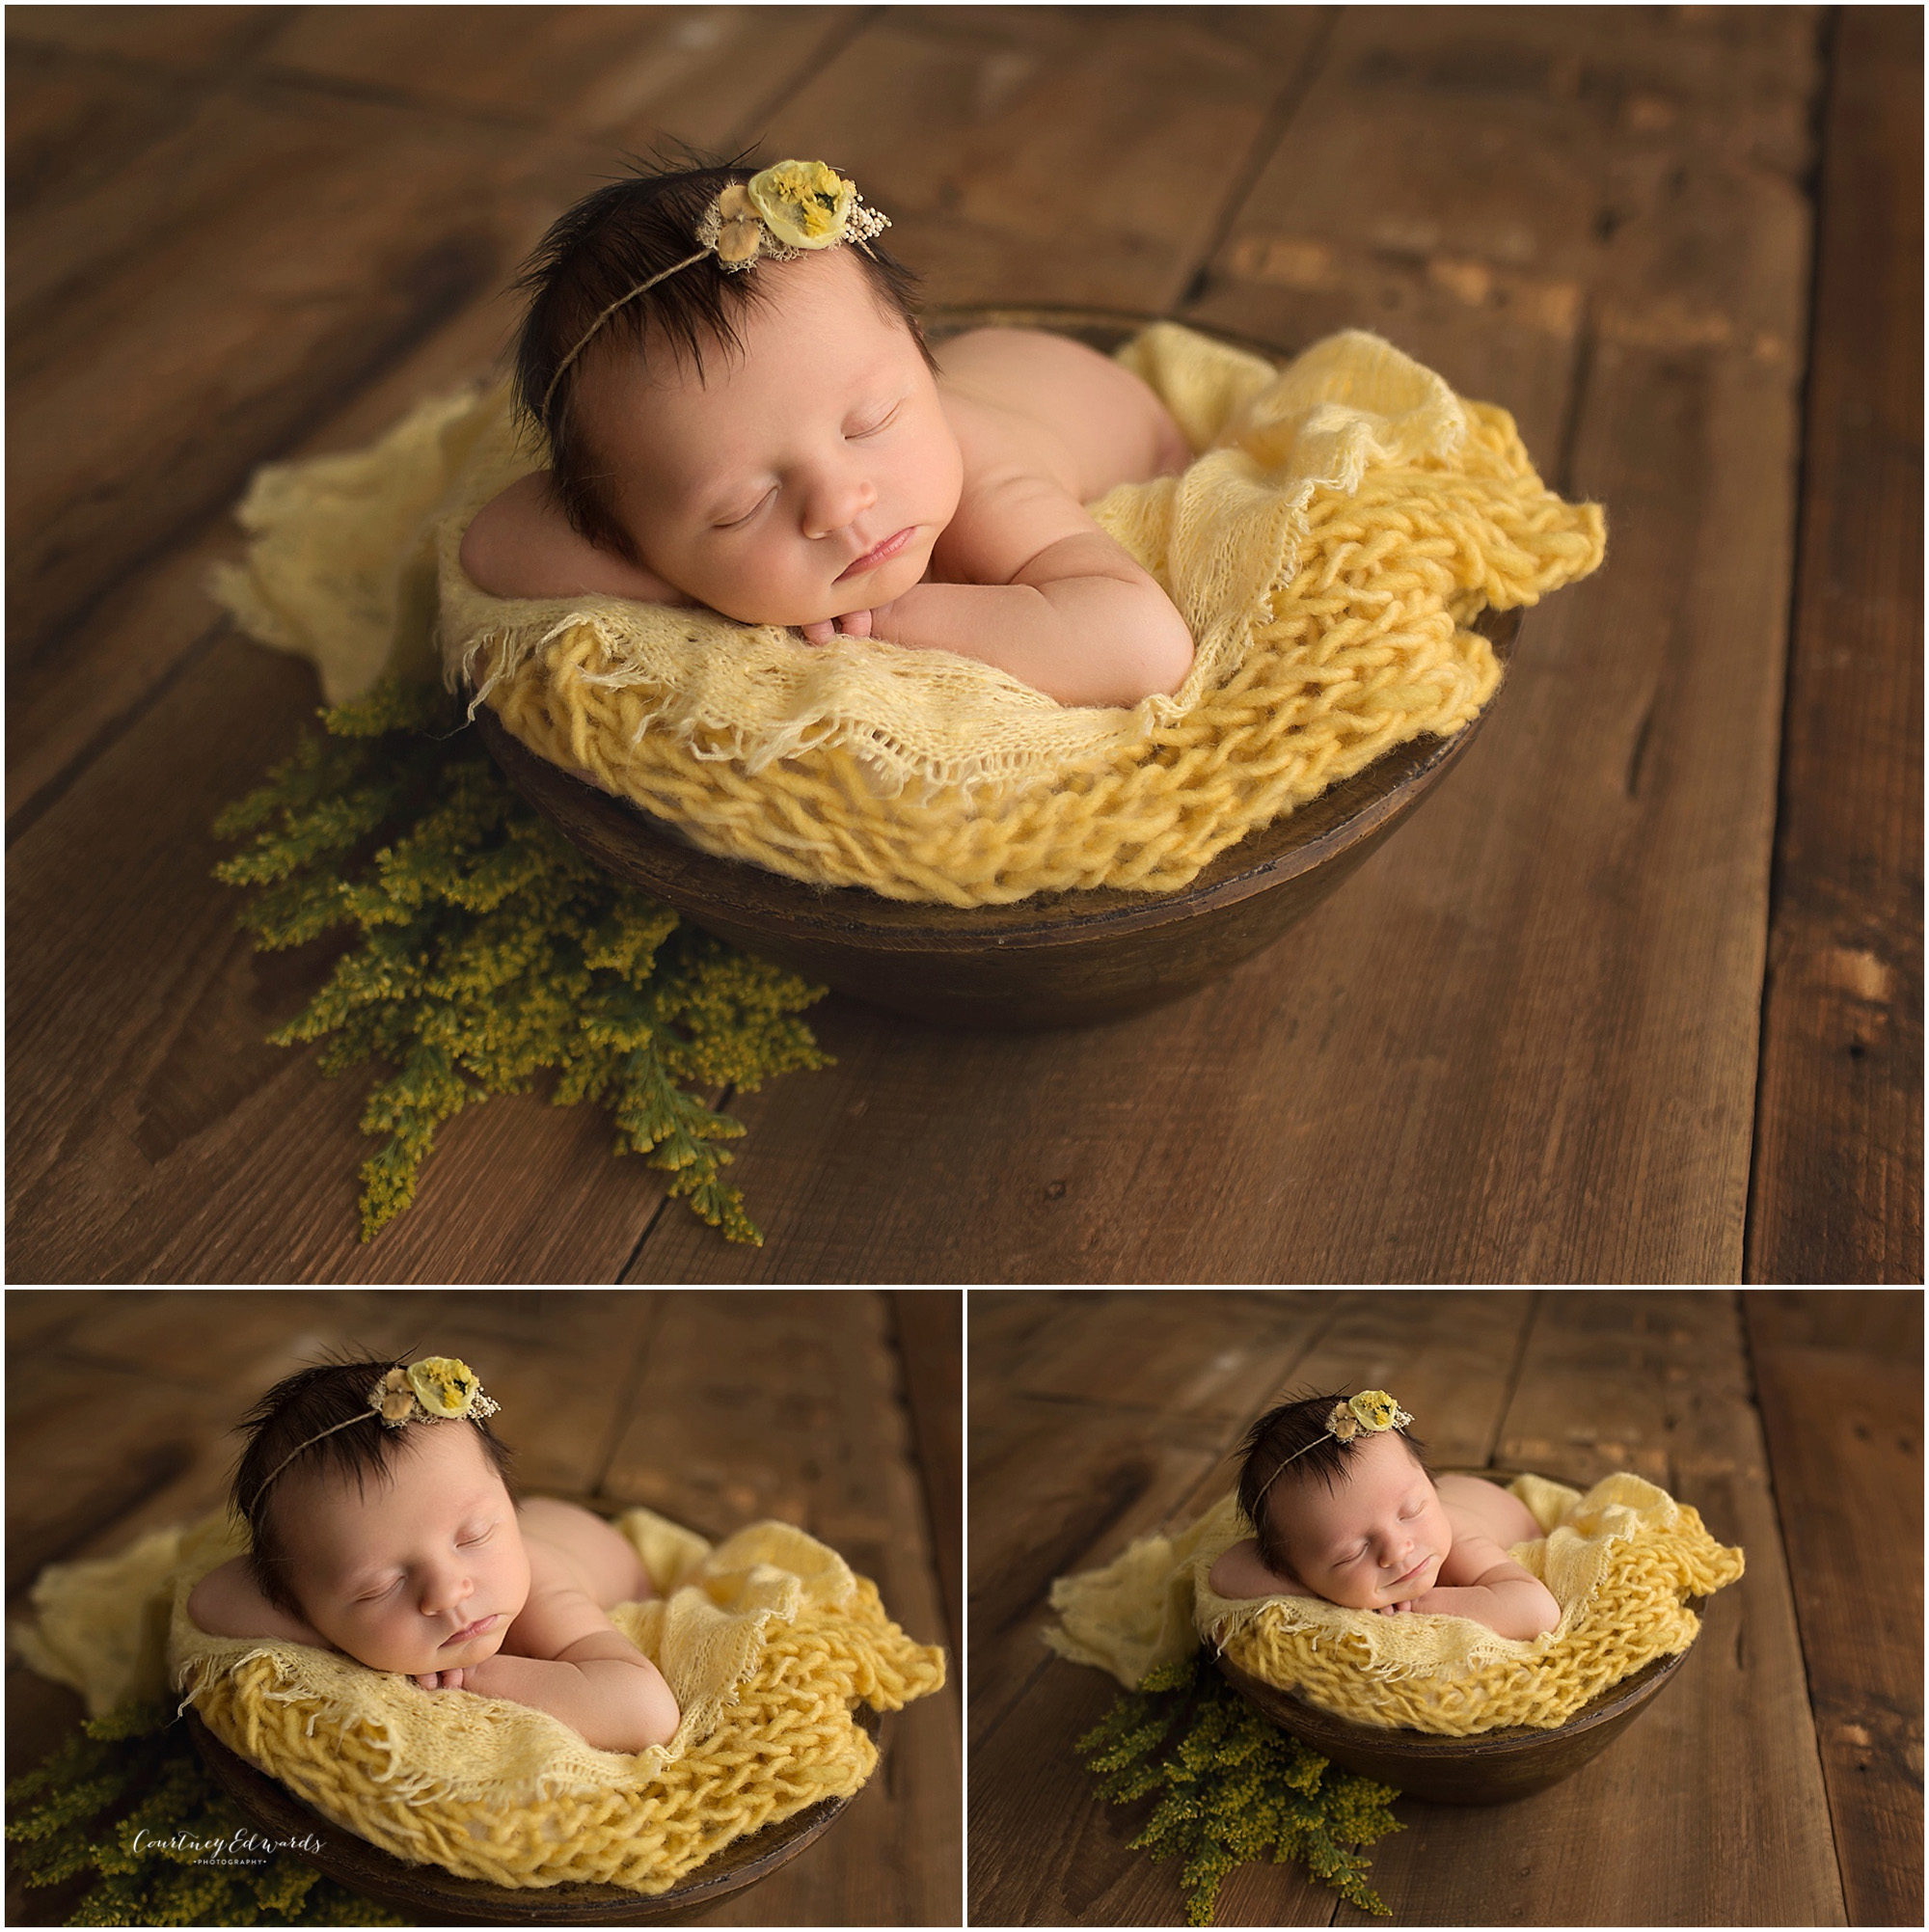 memphis baby in a bowl with yellow flowers